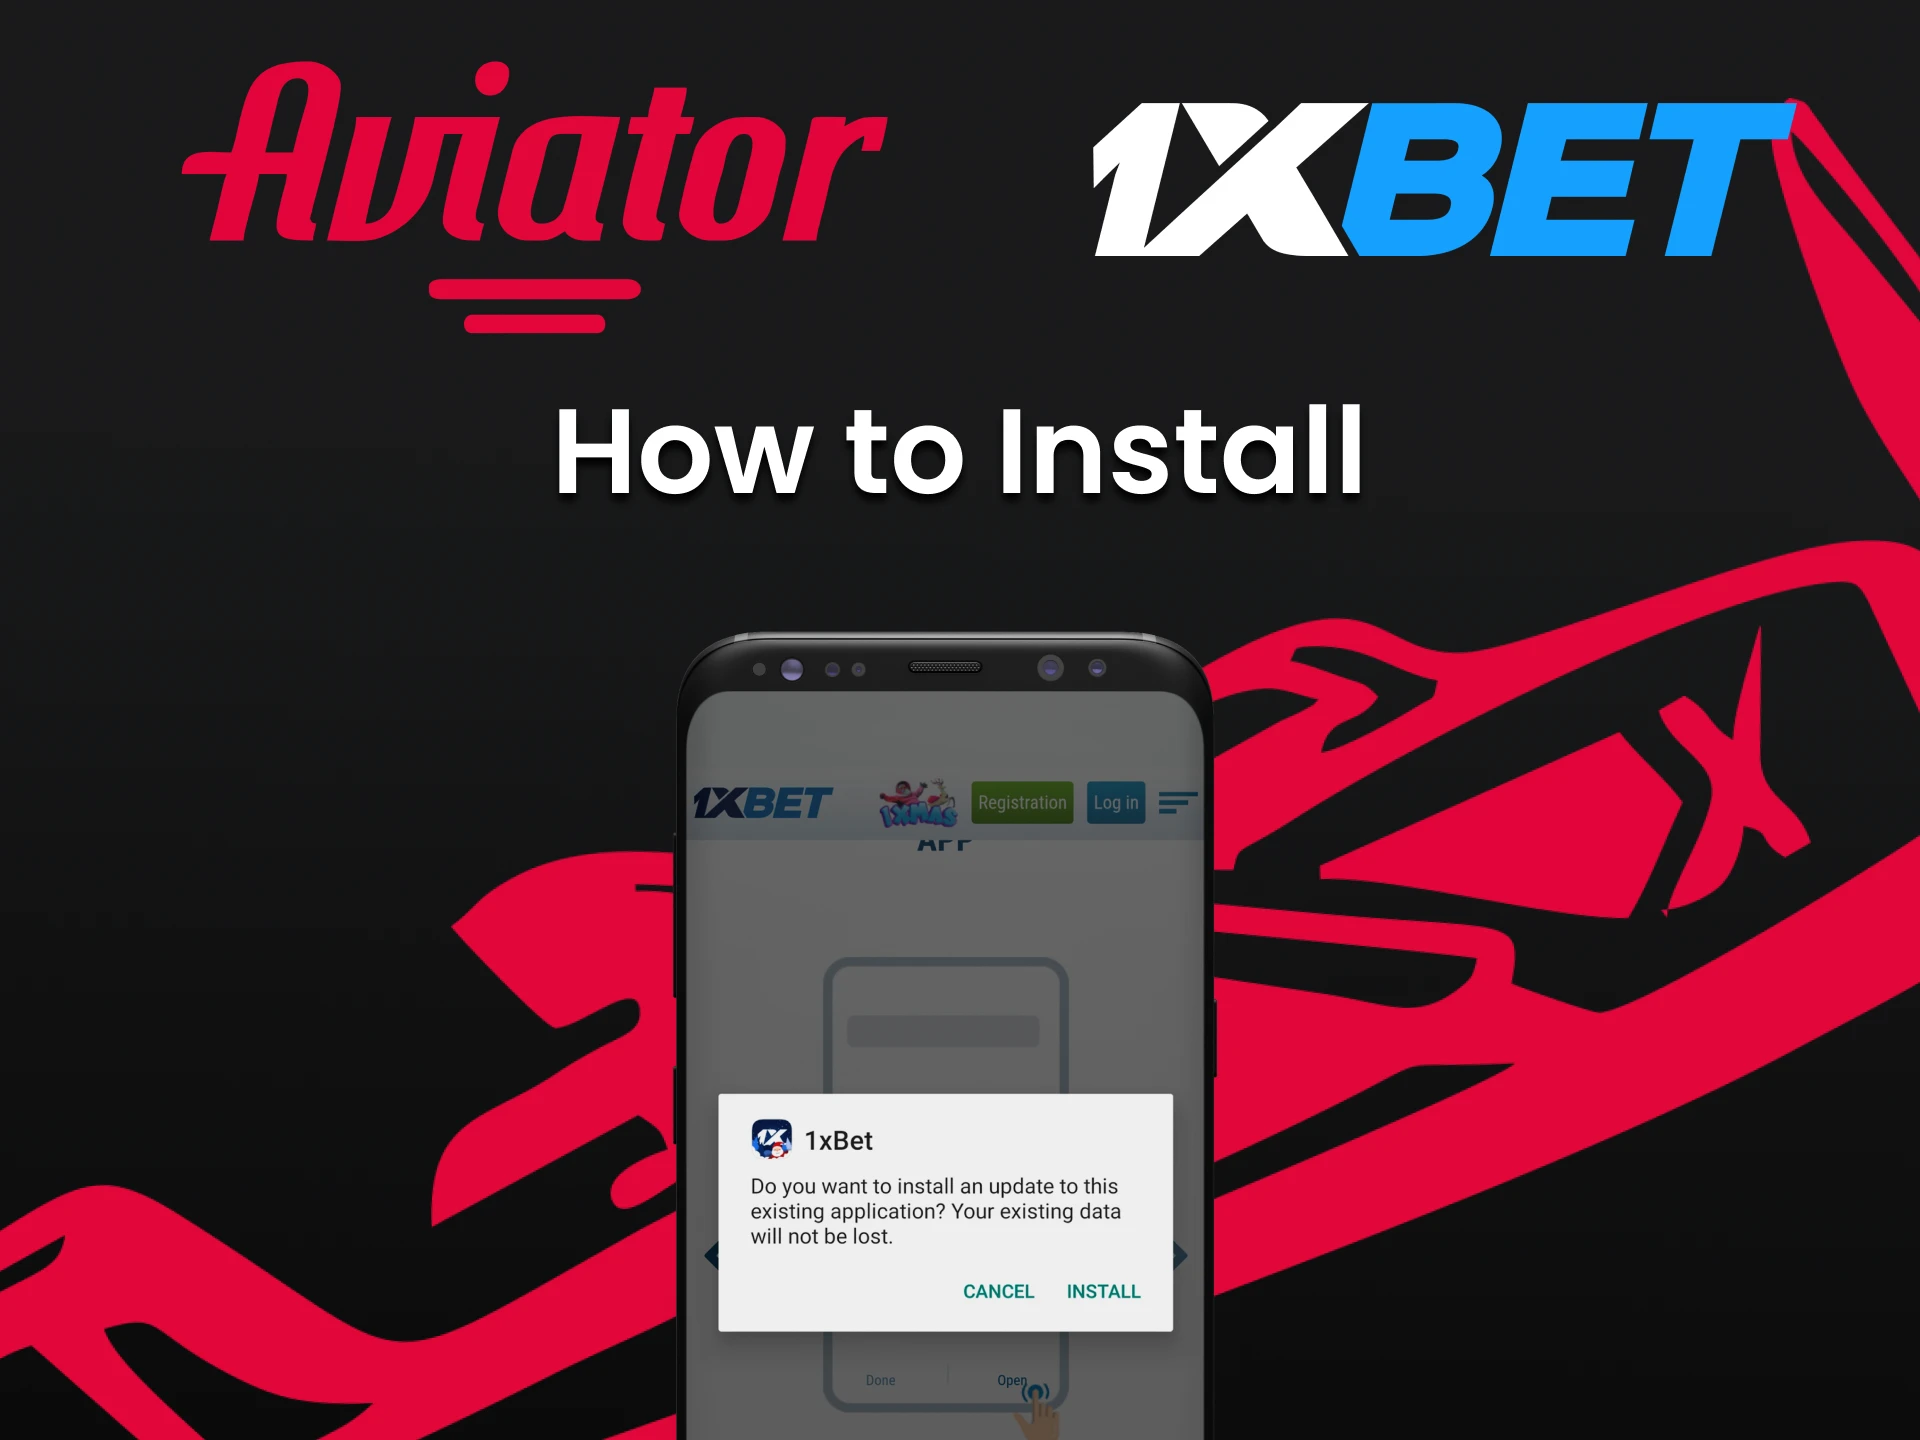 Install the application from 1xbet to play Aviator.